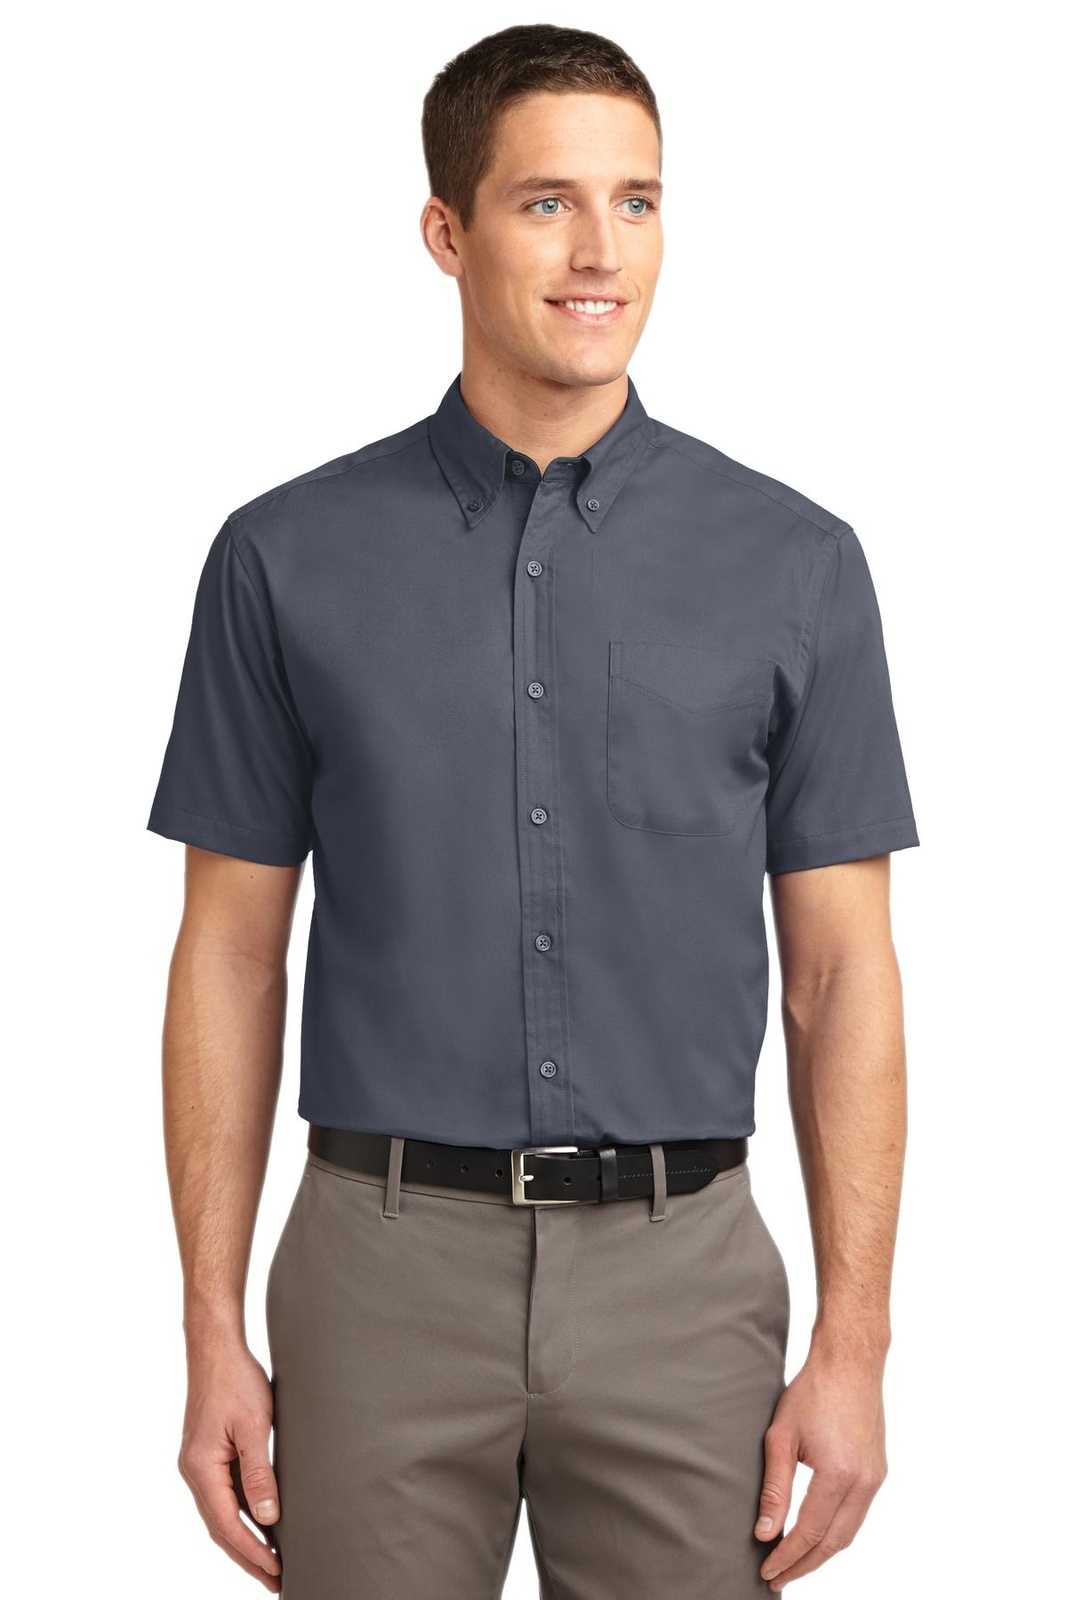 Port Authority S508 Short Sleeve Easy Care Shirt - Steel Gray Light Stone - HIT a Double - 1